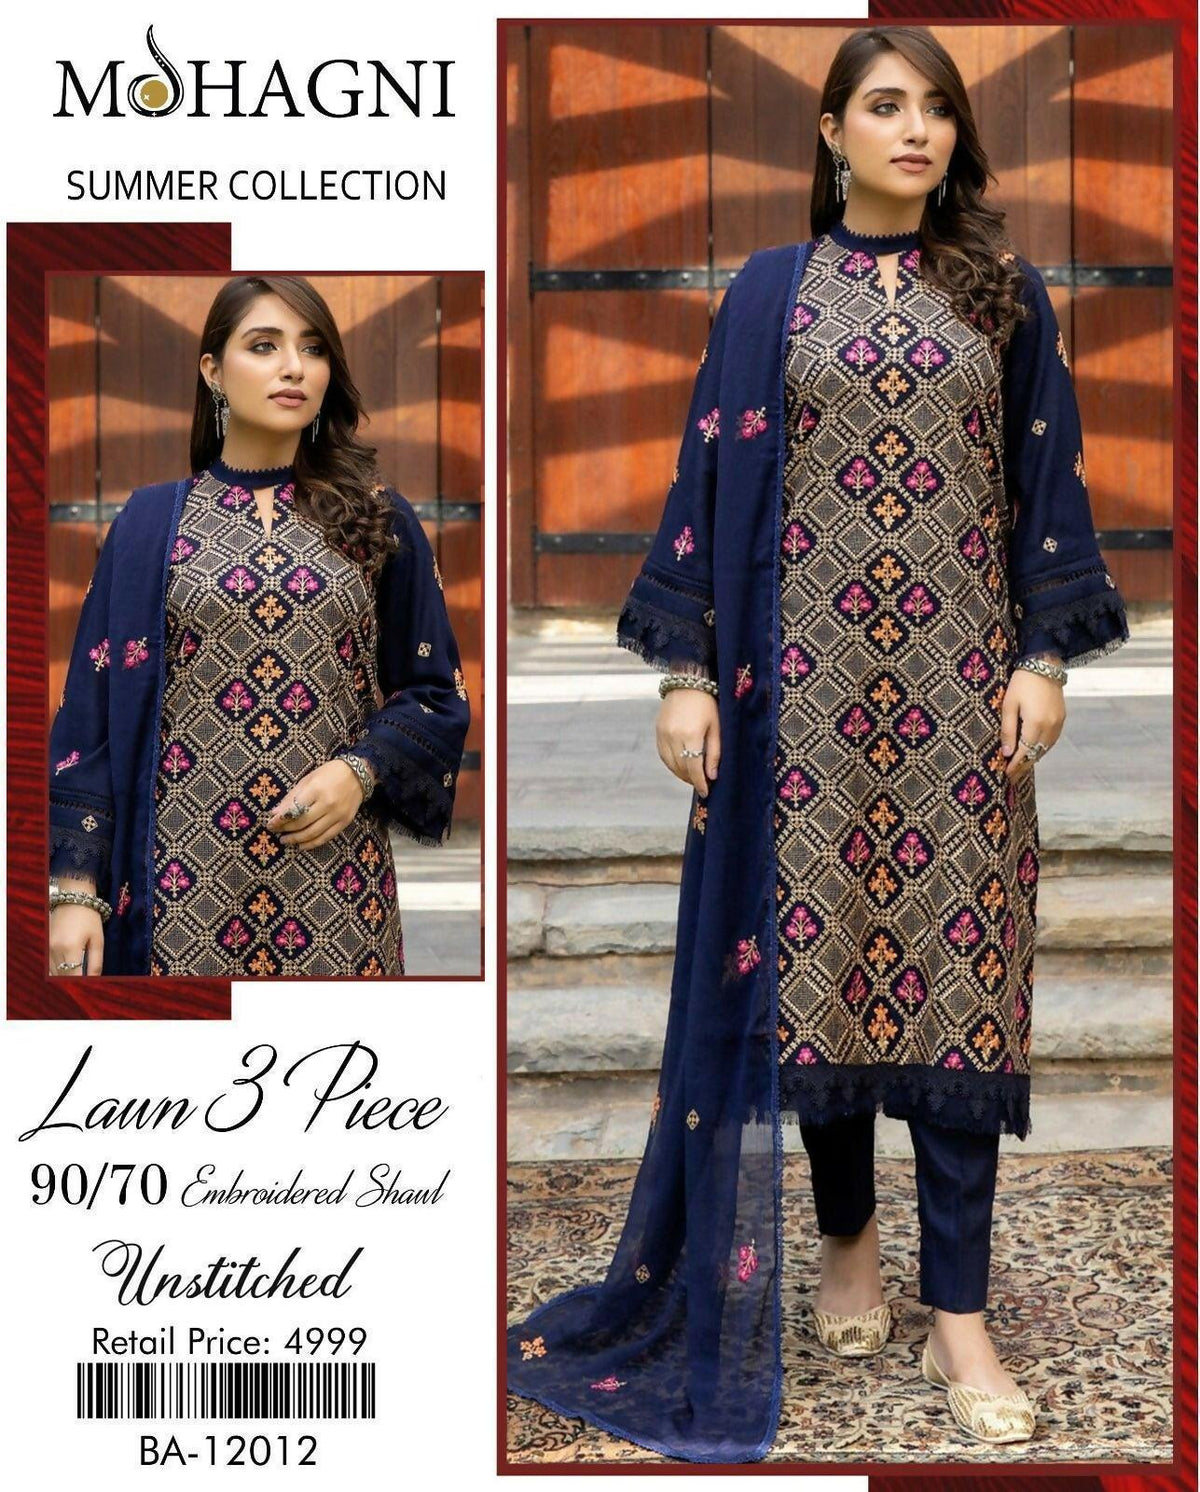 Mohagni Lawn Embroidered 3pc Suit Summer dress - ValueBox